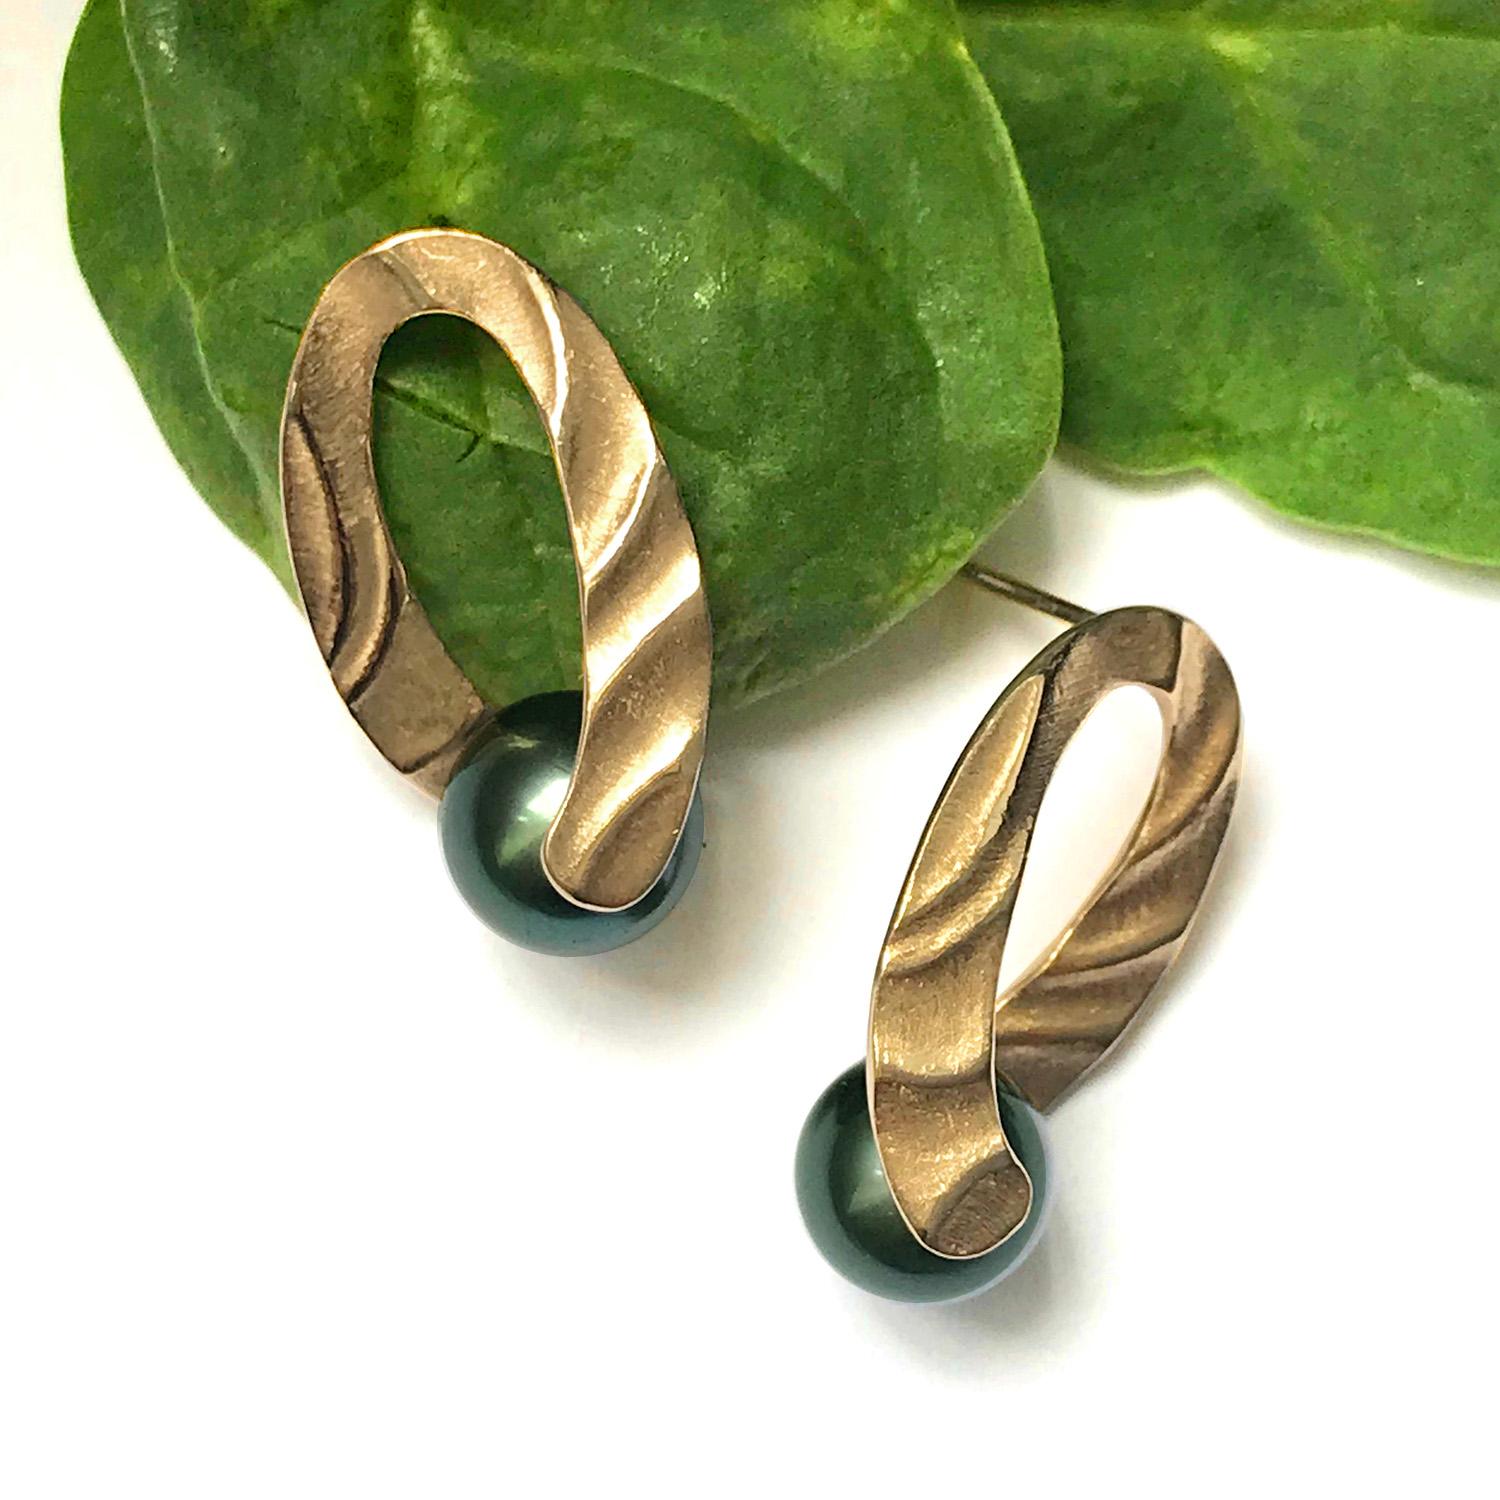 K.Mita's Holding You Earrings, which are 26 x 13 x 14mm and made from 14k Yellow Gold, twist slightly as they grasp a 9-10mm Tahitian Pearl. The Sand Dune texture, with its undulating patterns, highlights the efforts we make to hold on to what is